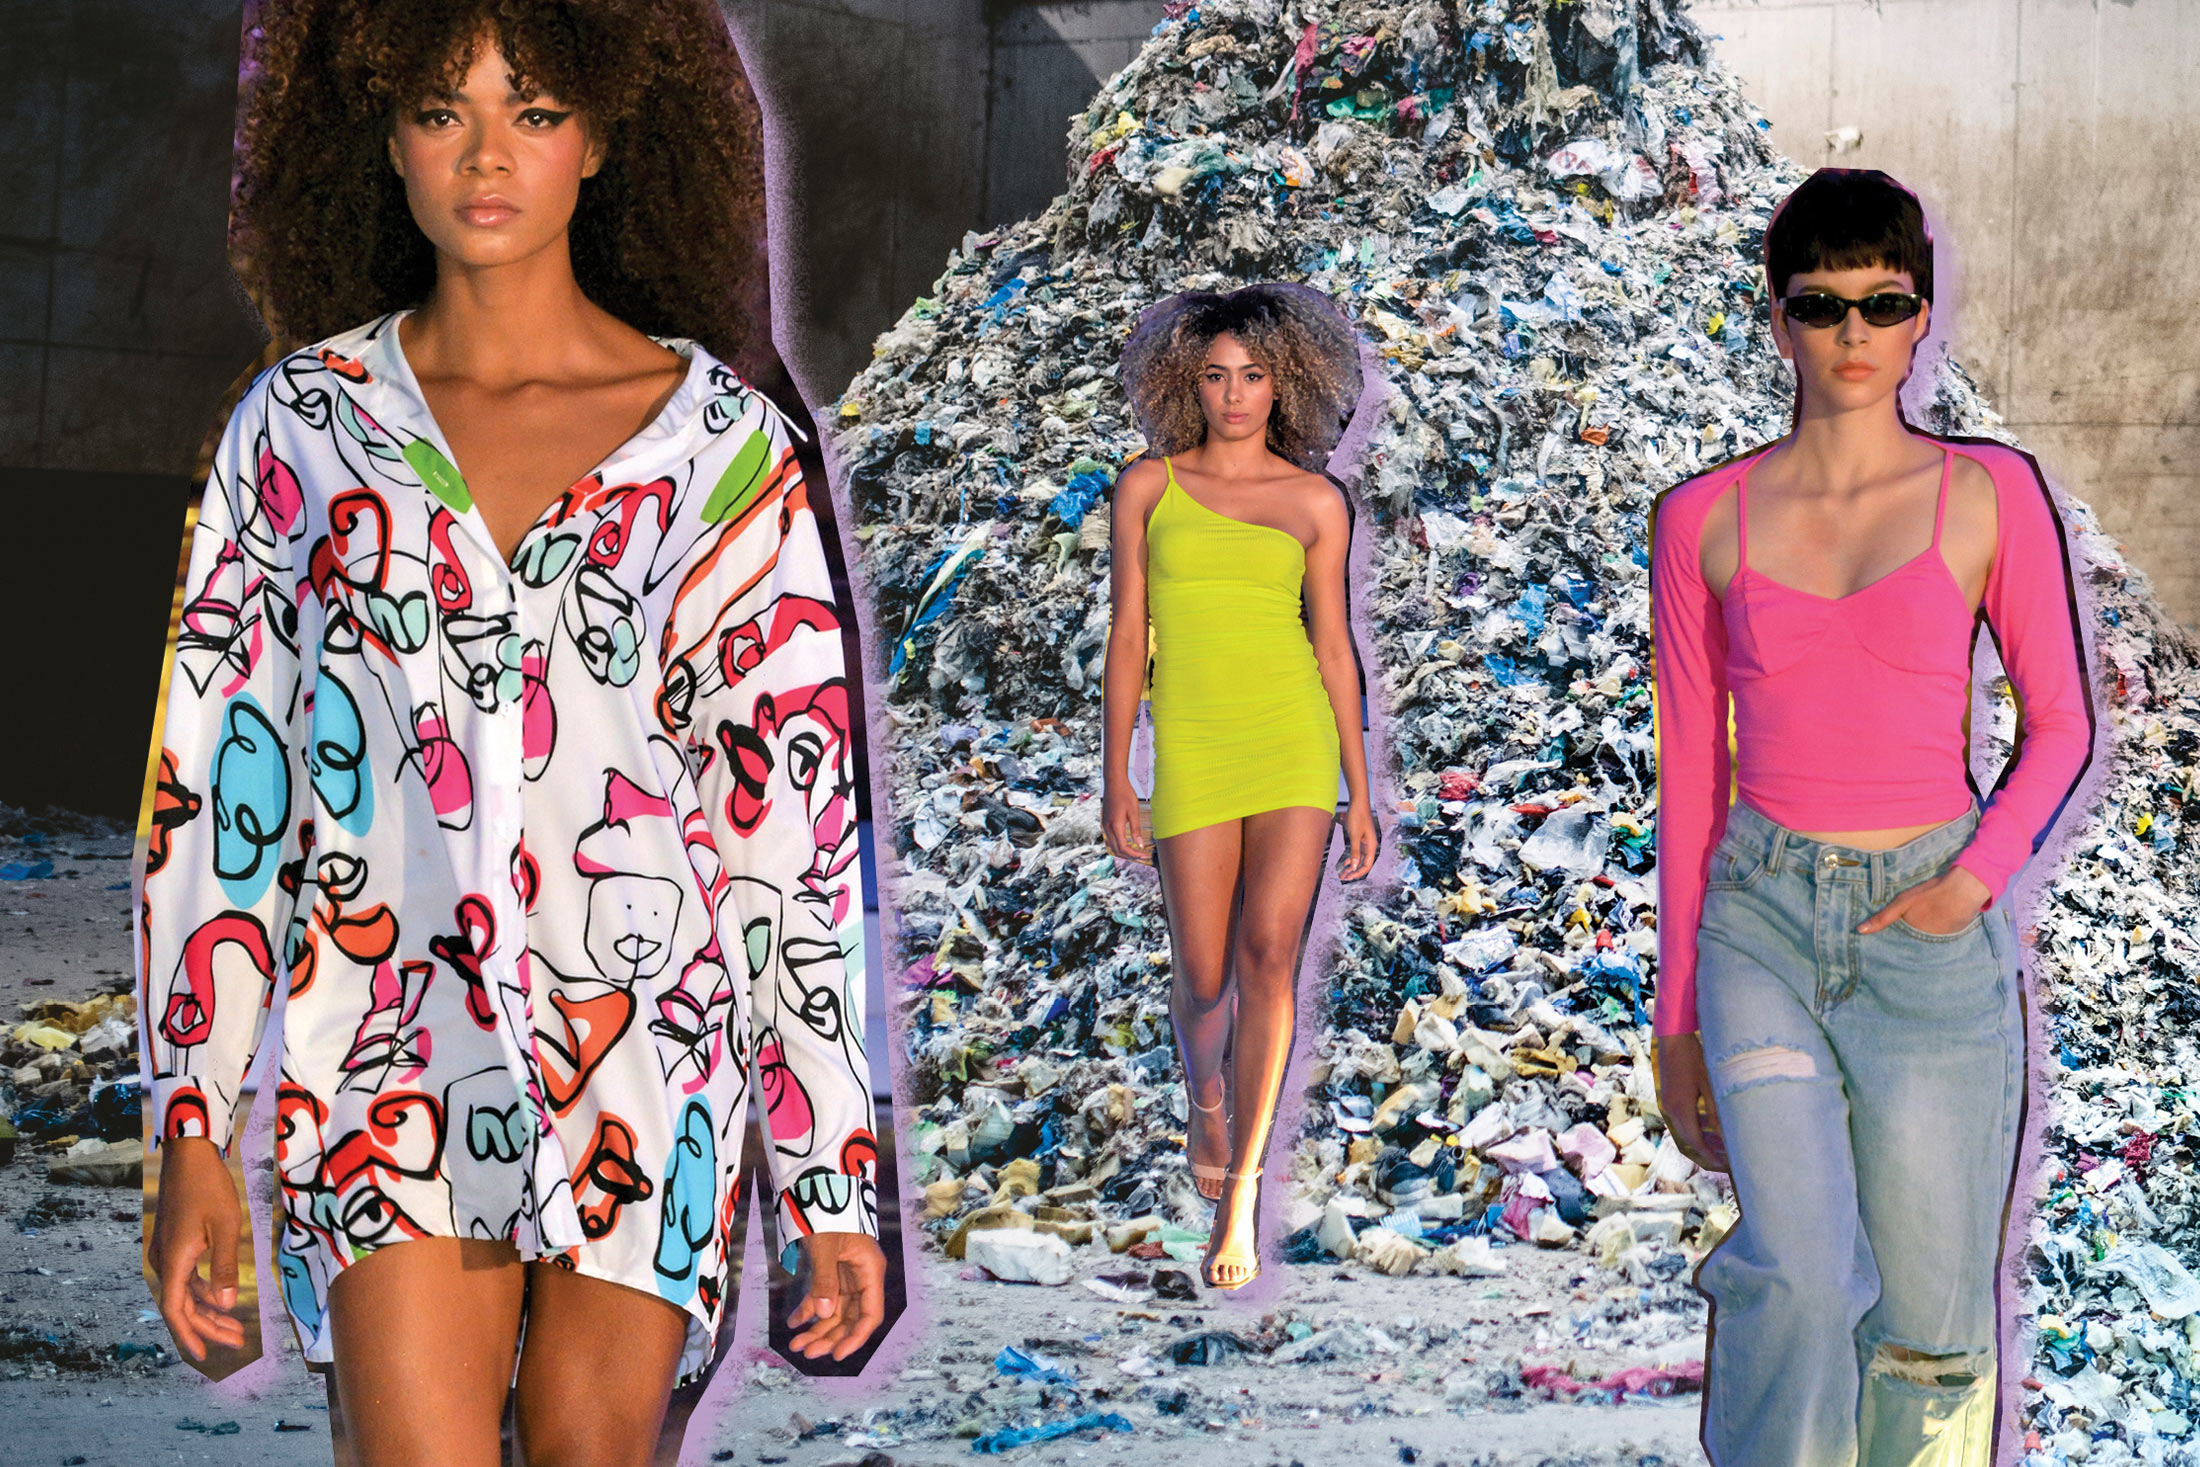 fashion industry: Fast fashion industry wants cheap, disposable